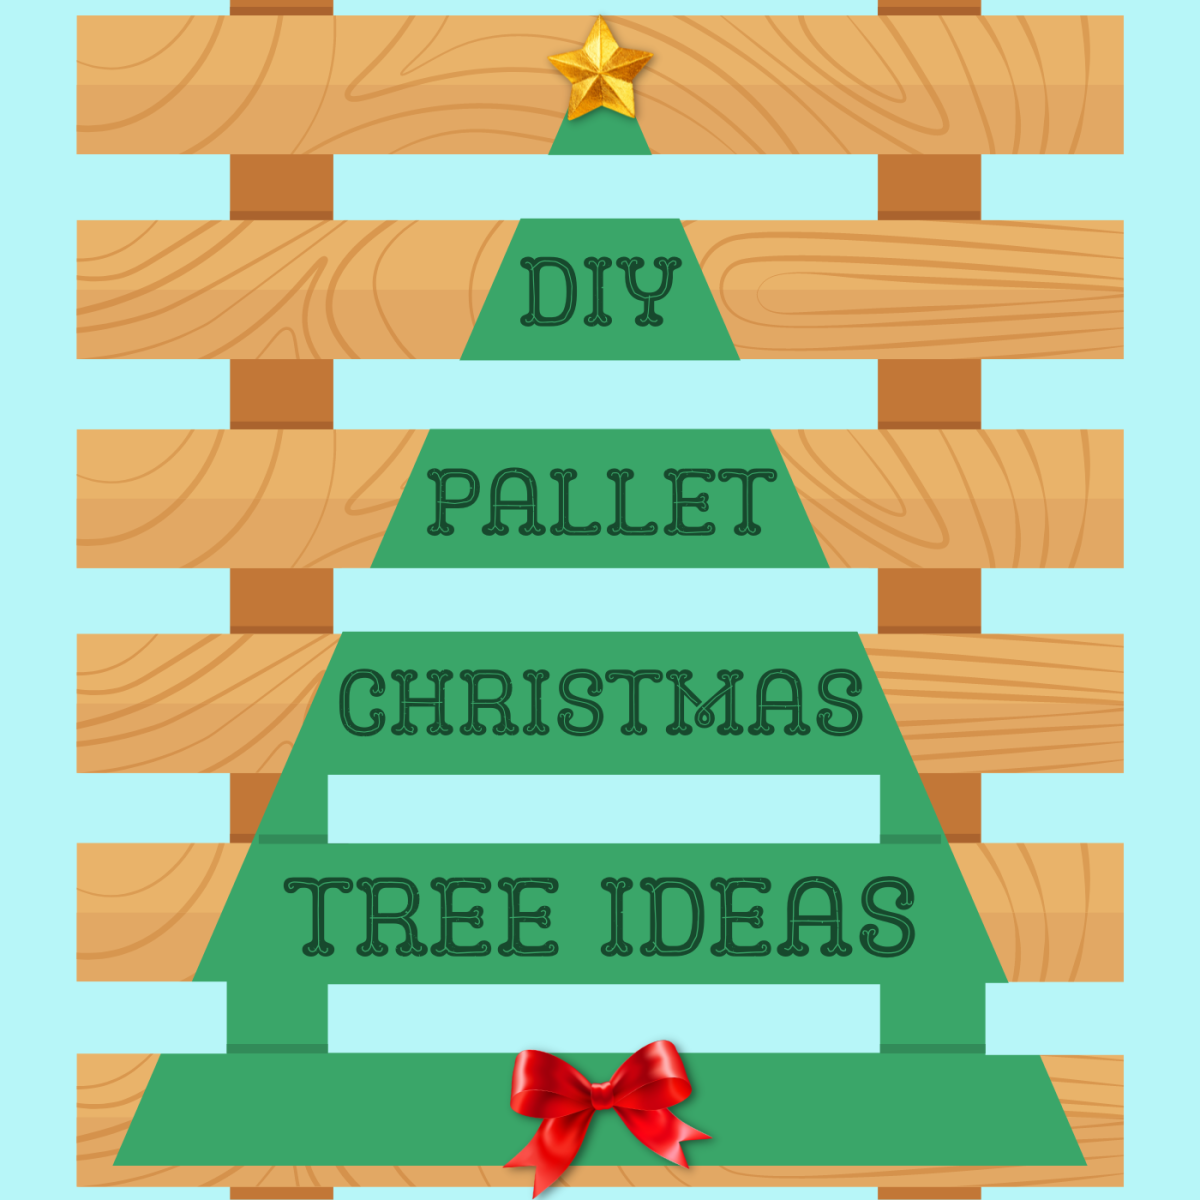 If you can't have a real tree in your home, try one of these space-saving pallet Christmas tree projects!